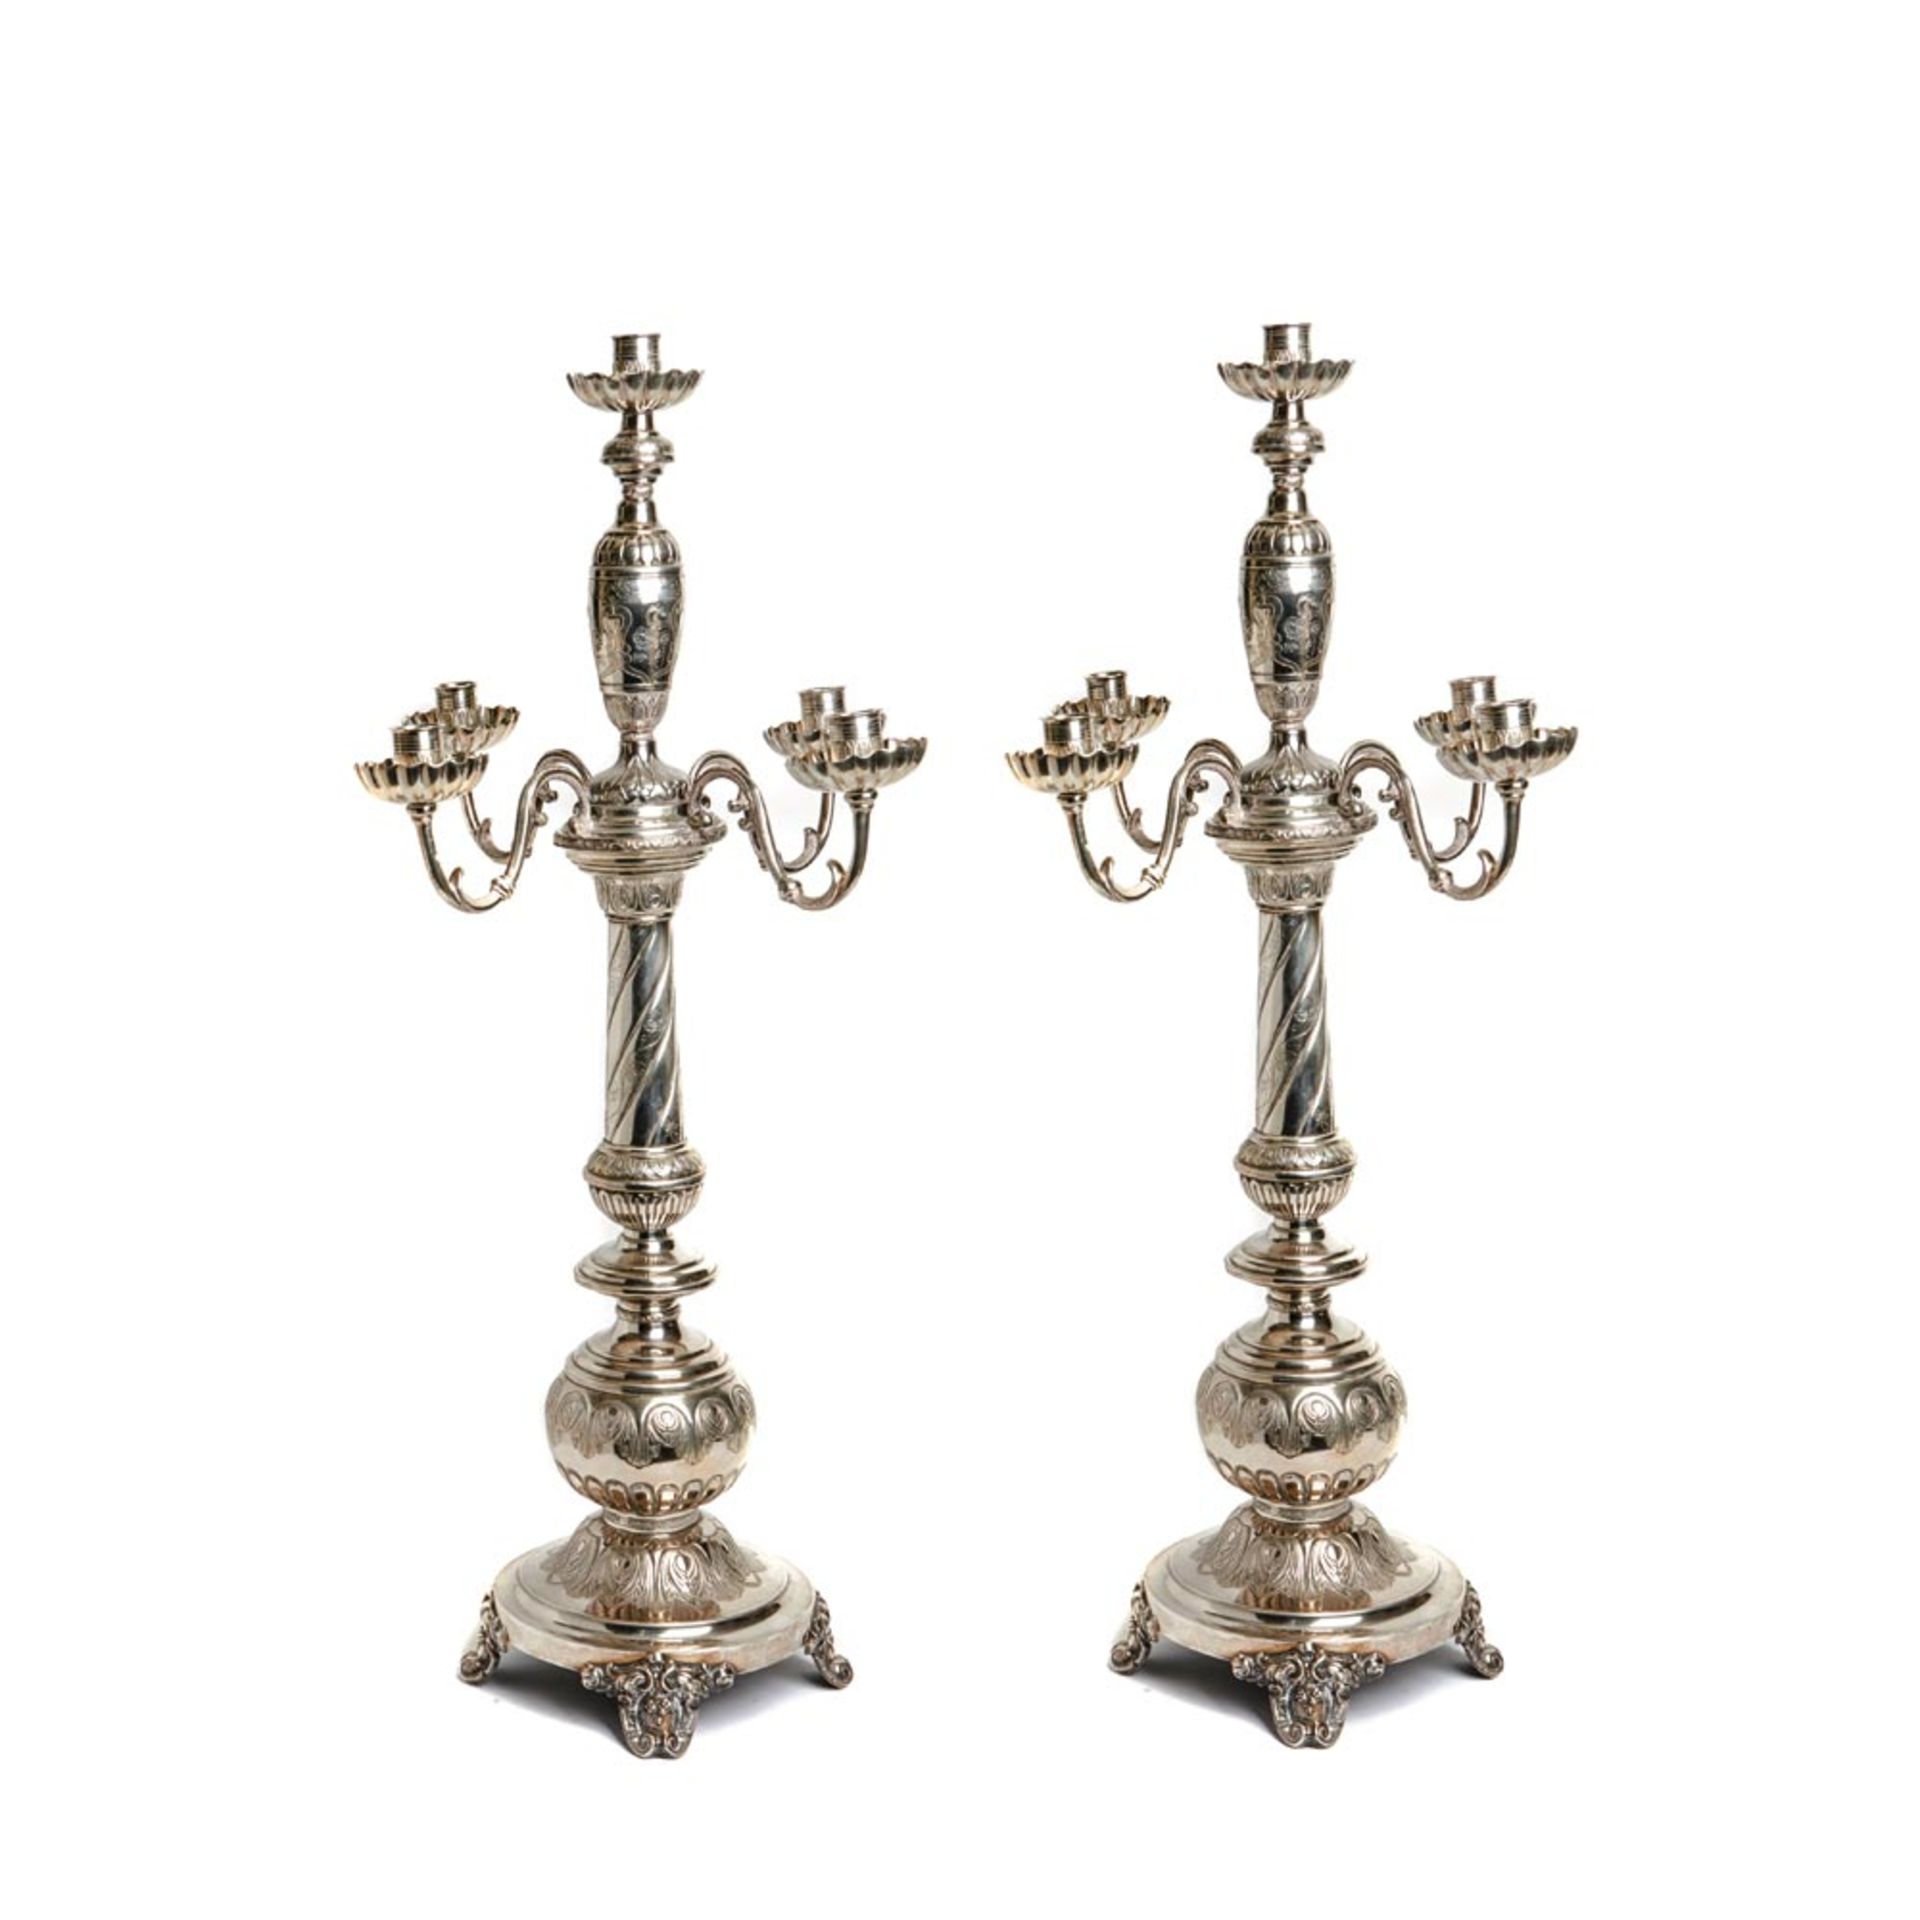 Silver pair of candelabras, early 20th century